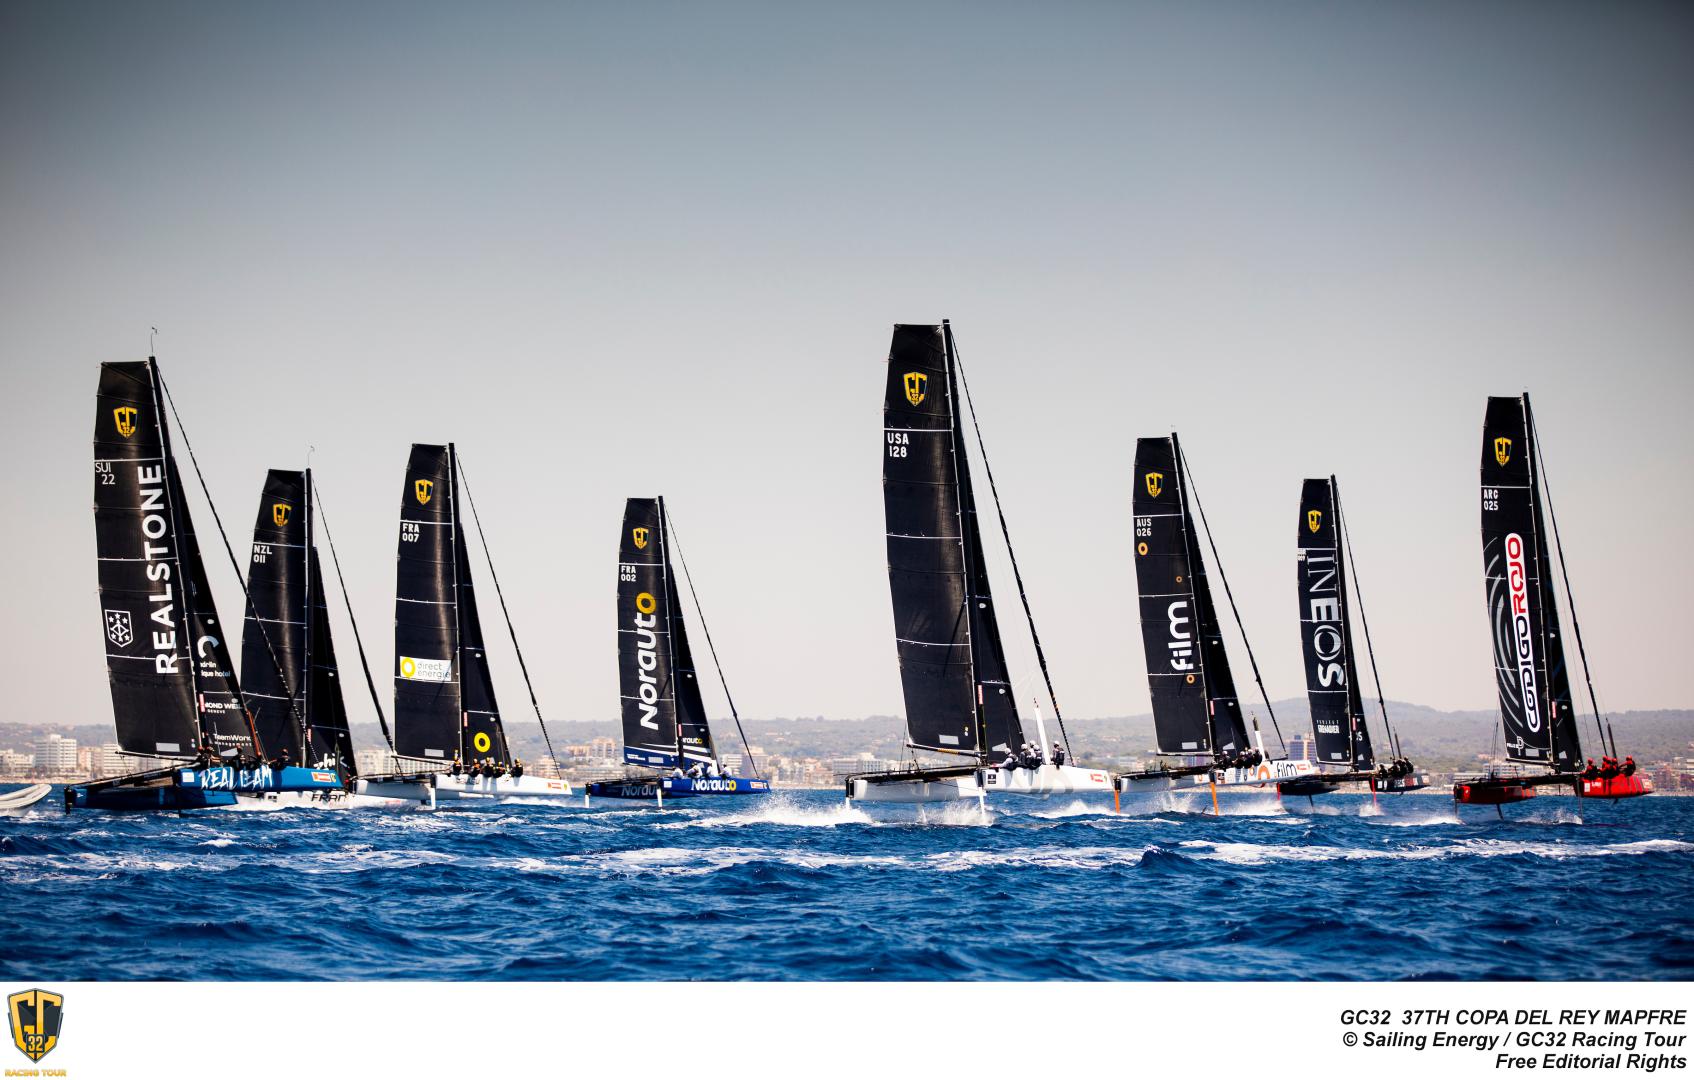 The eight flying GC32 catamarans competing at Copa del Rey MAPFRE